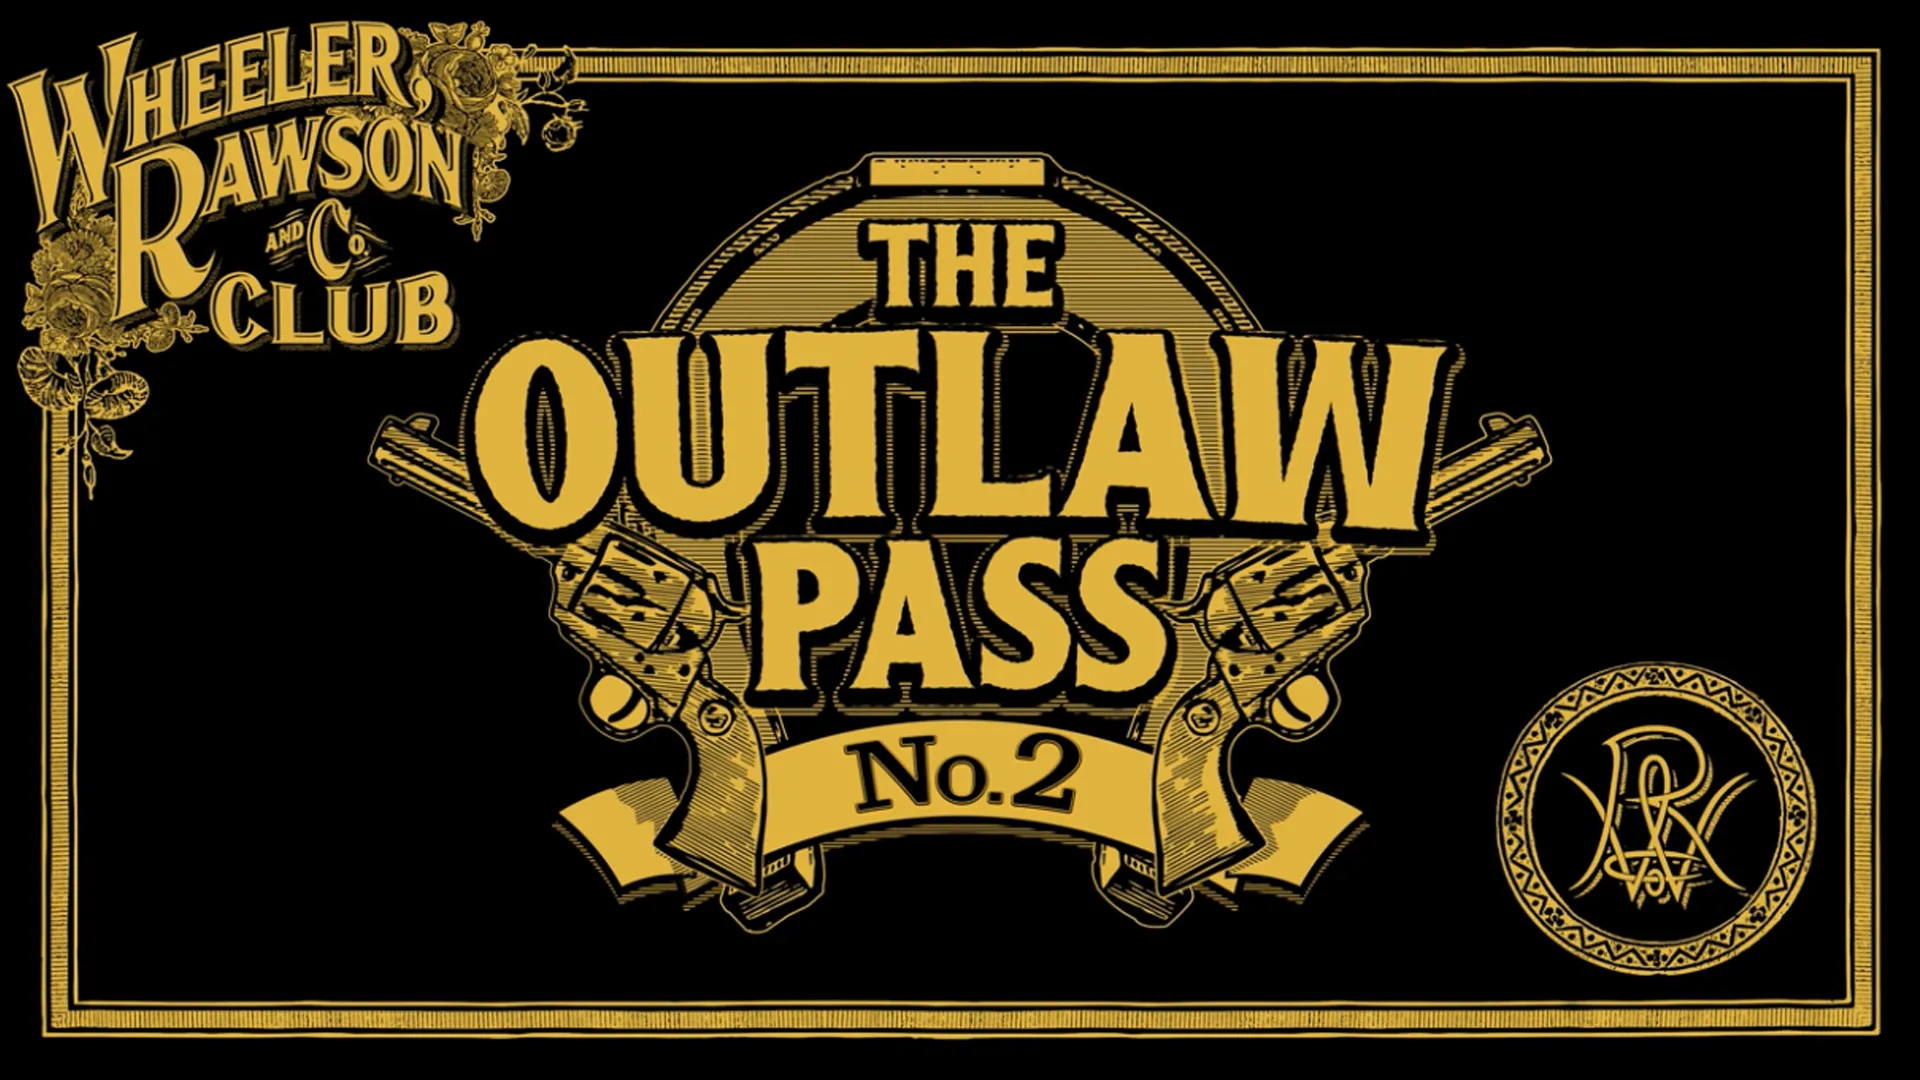 https://www.gtabase.com/images/jch-optimize/ng/images_red-dead-redemption-2_articles_red-dead-online-outlaw-pass-2.webp